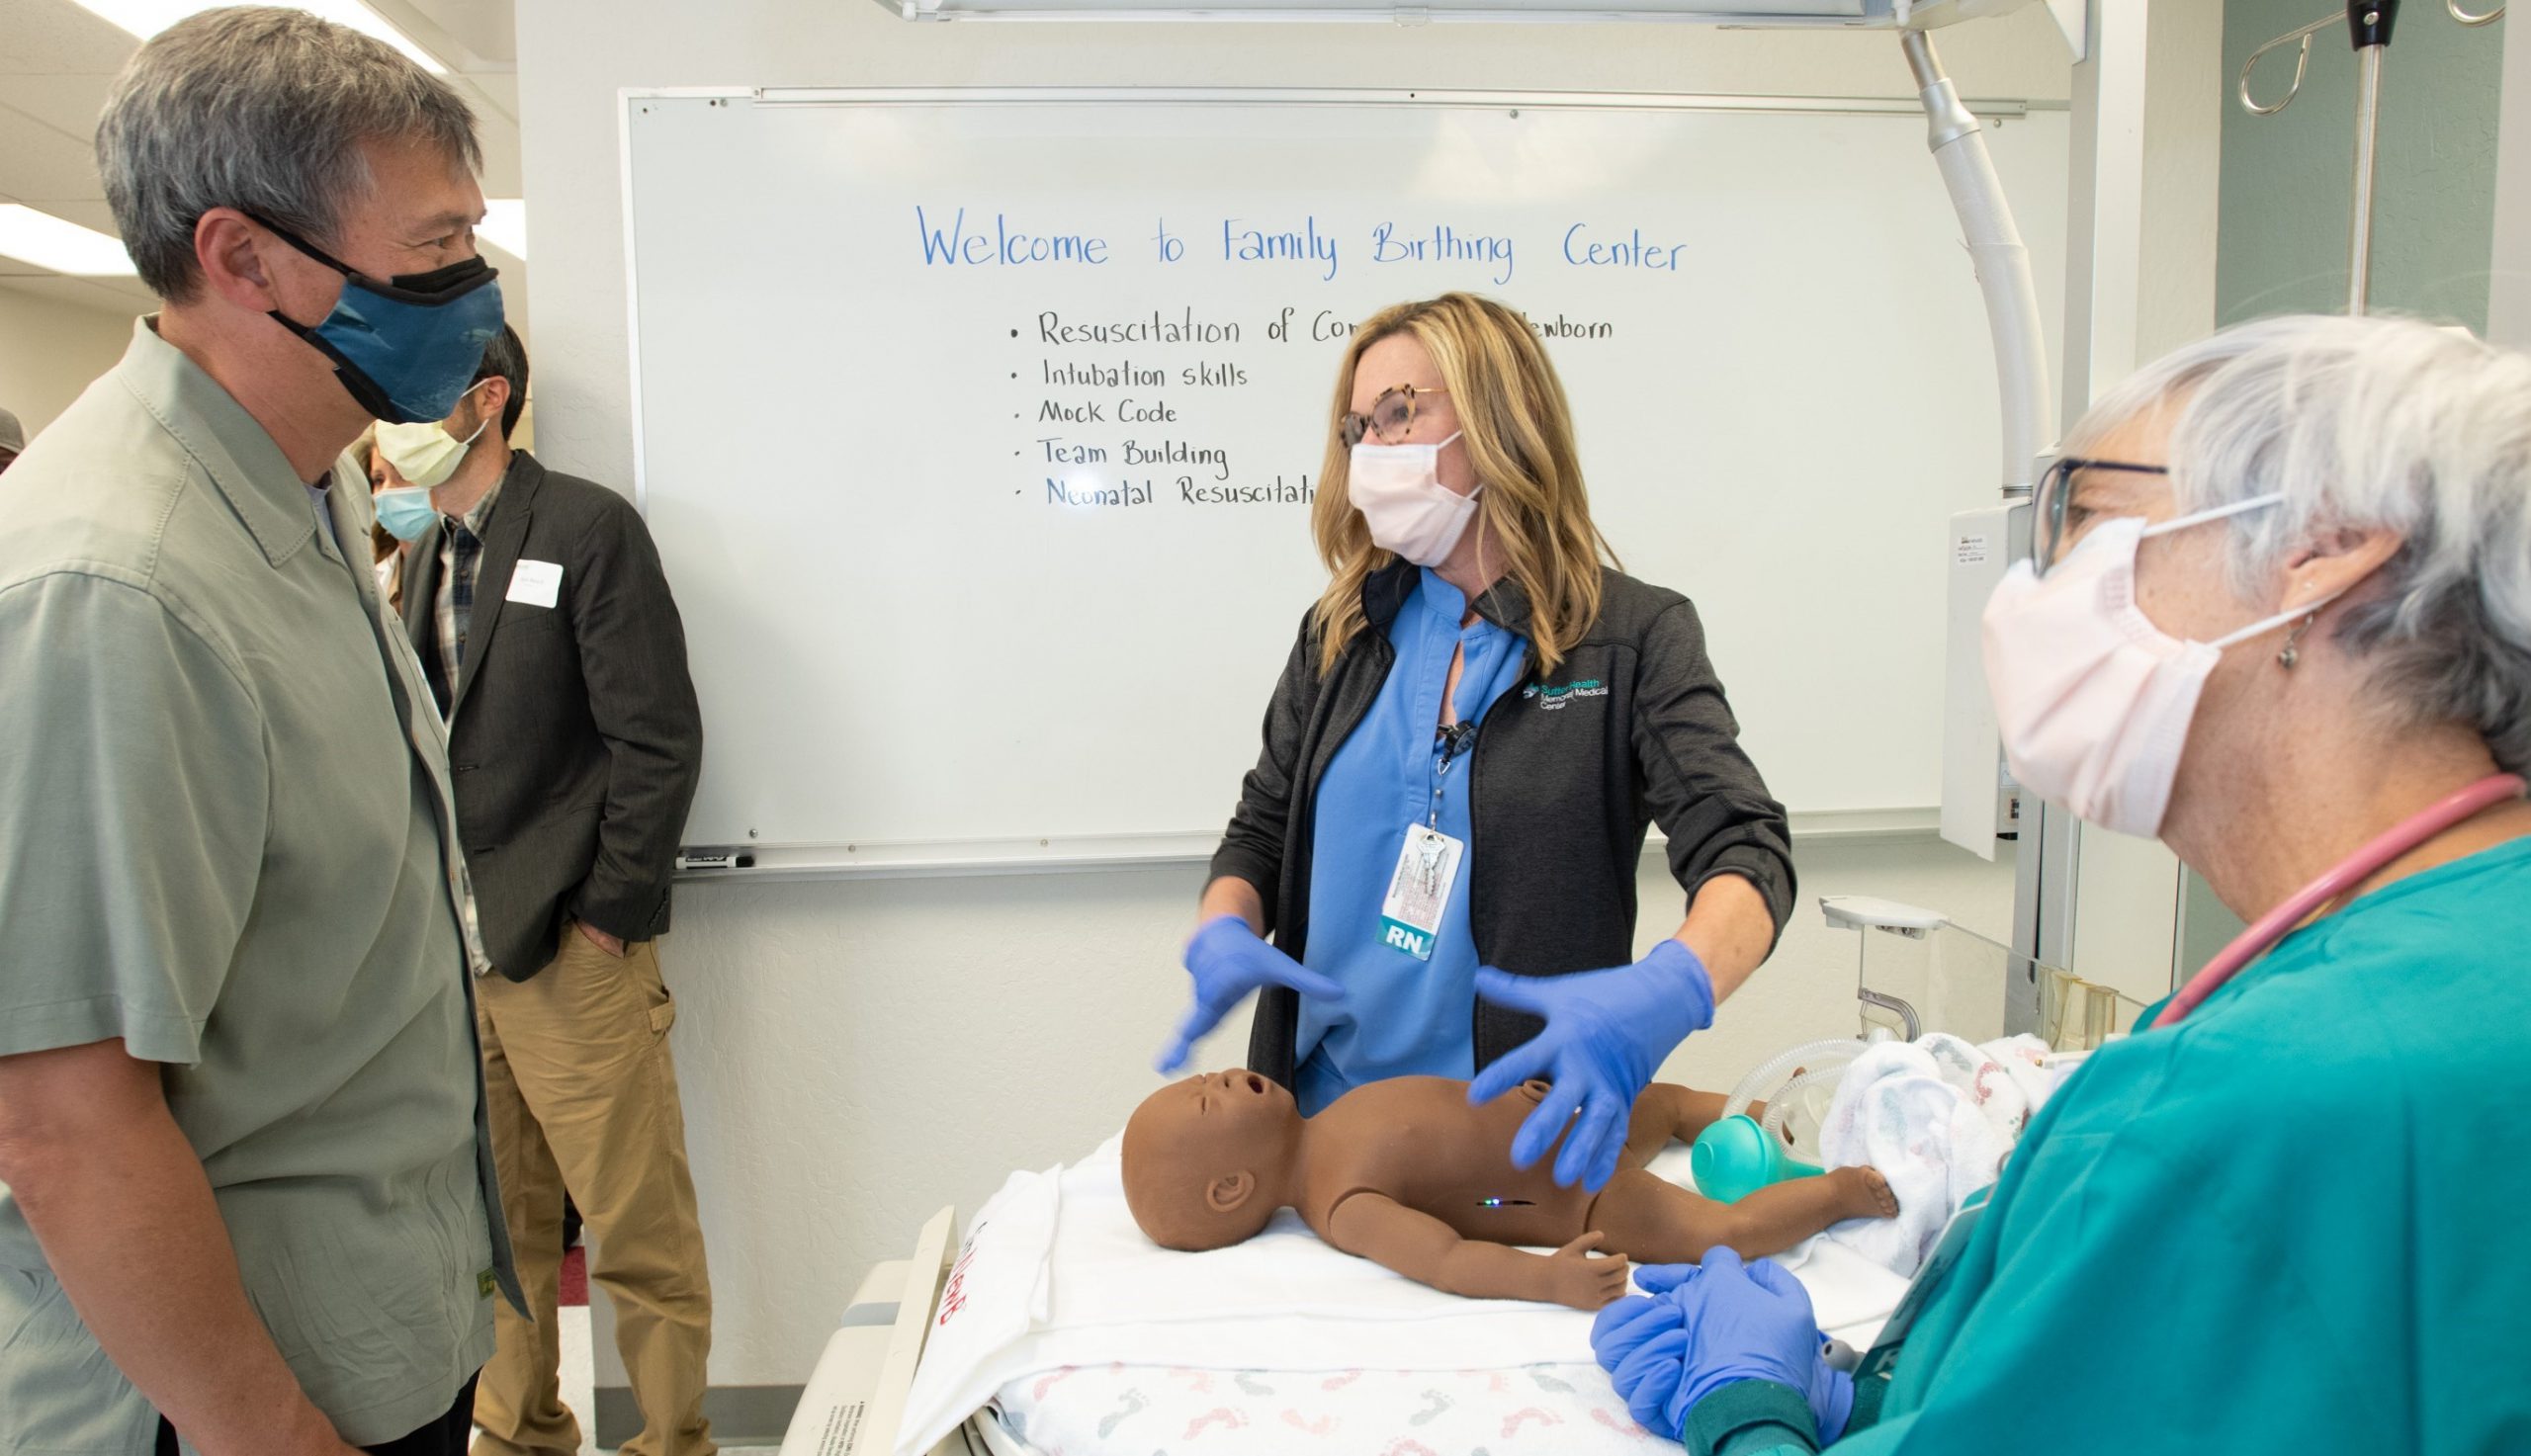 Critical care training with baby simulator